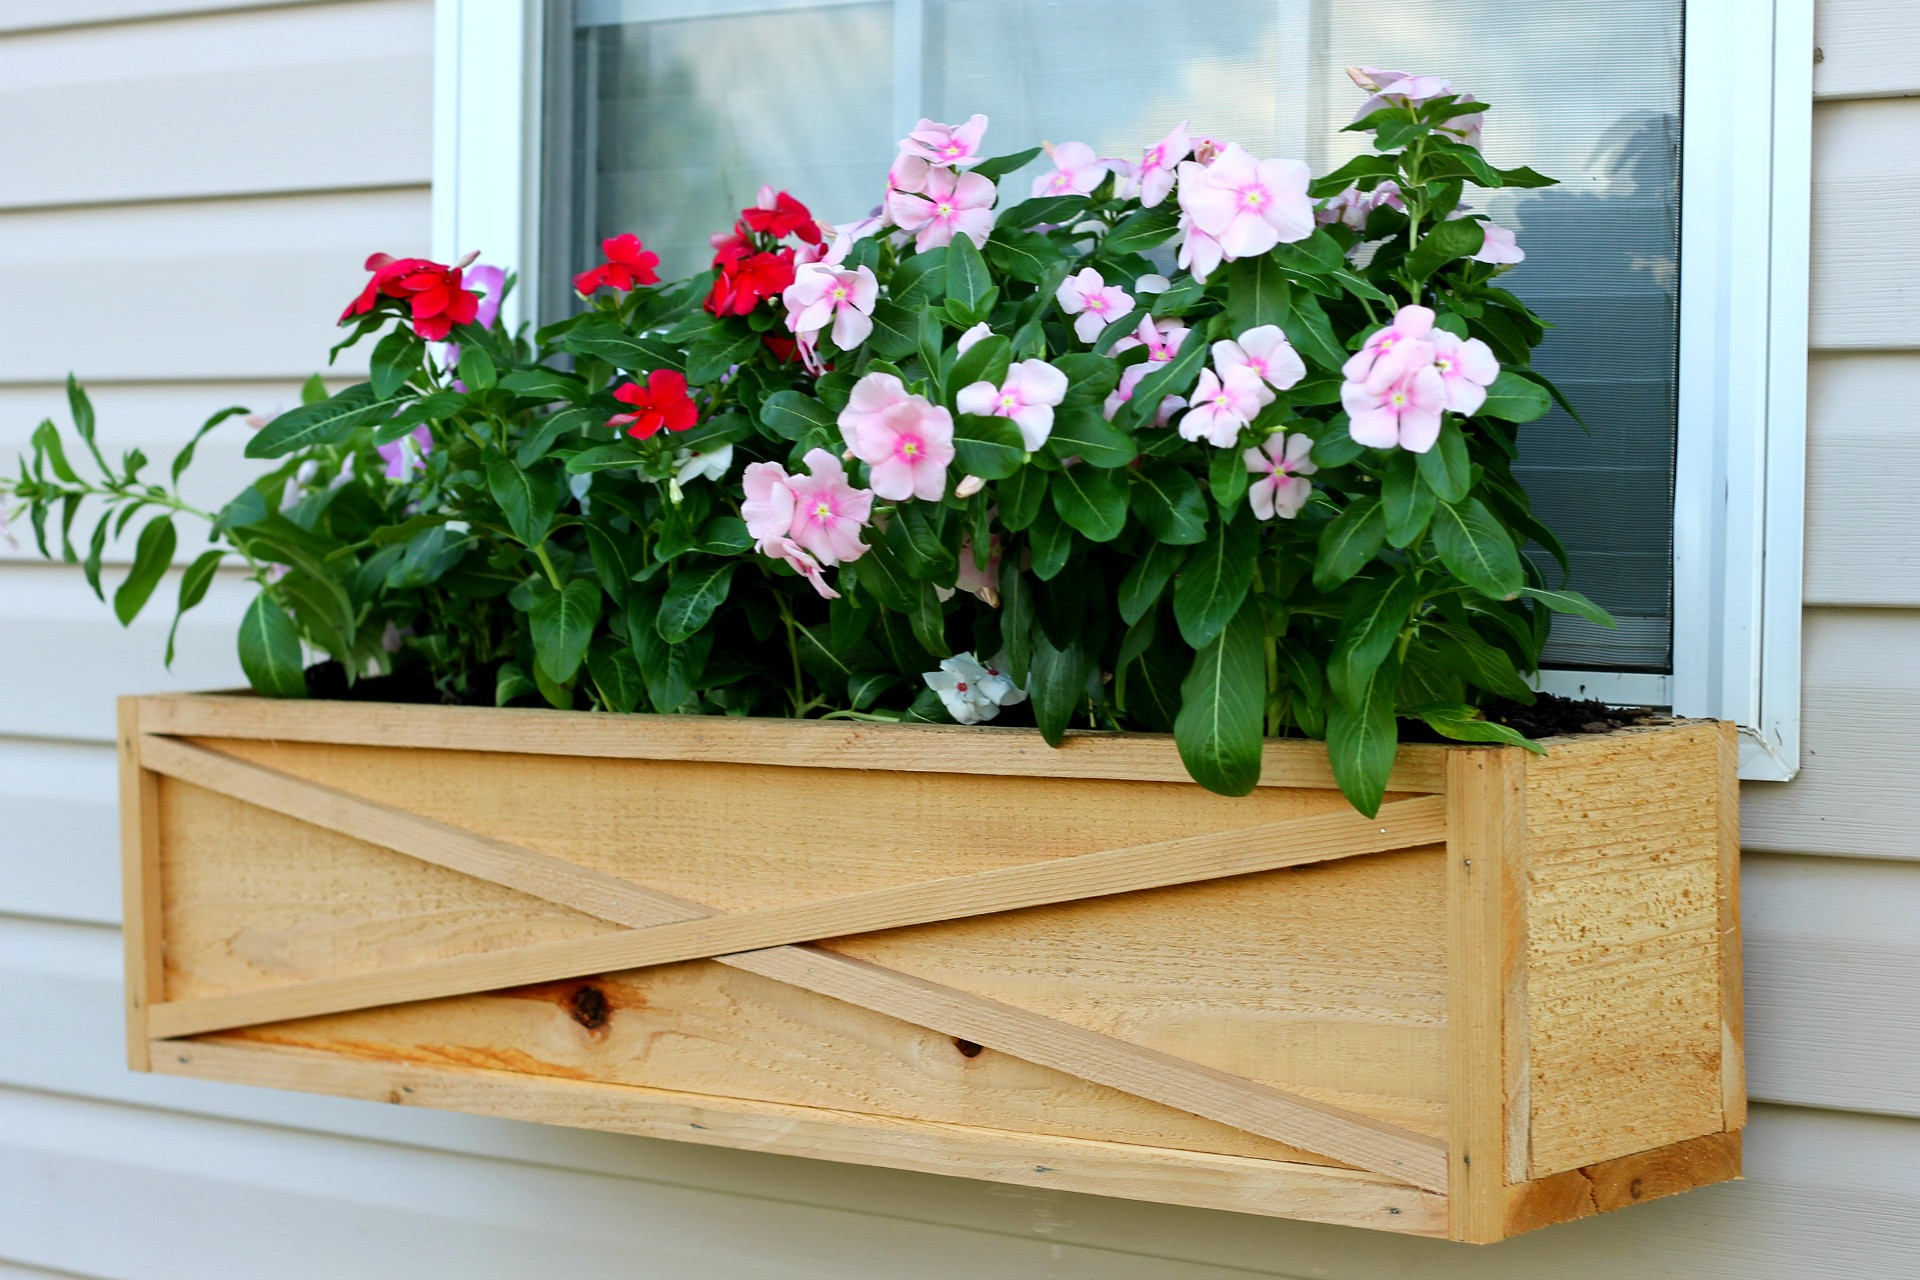 Window Boxes DIY
 23 DIY Window Box Ideas Build And Fill Them With Colorful